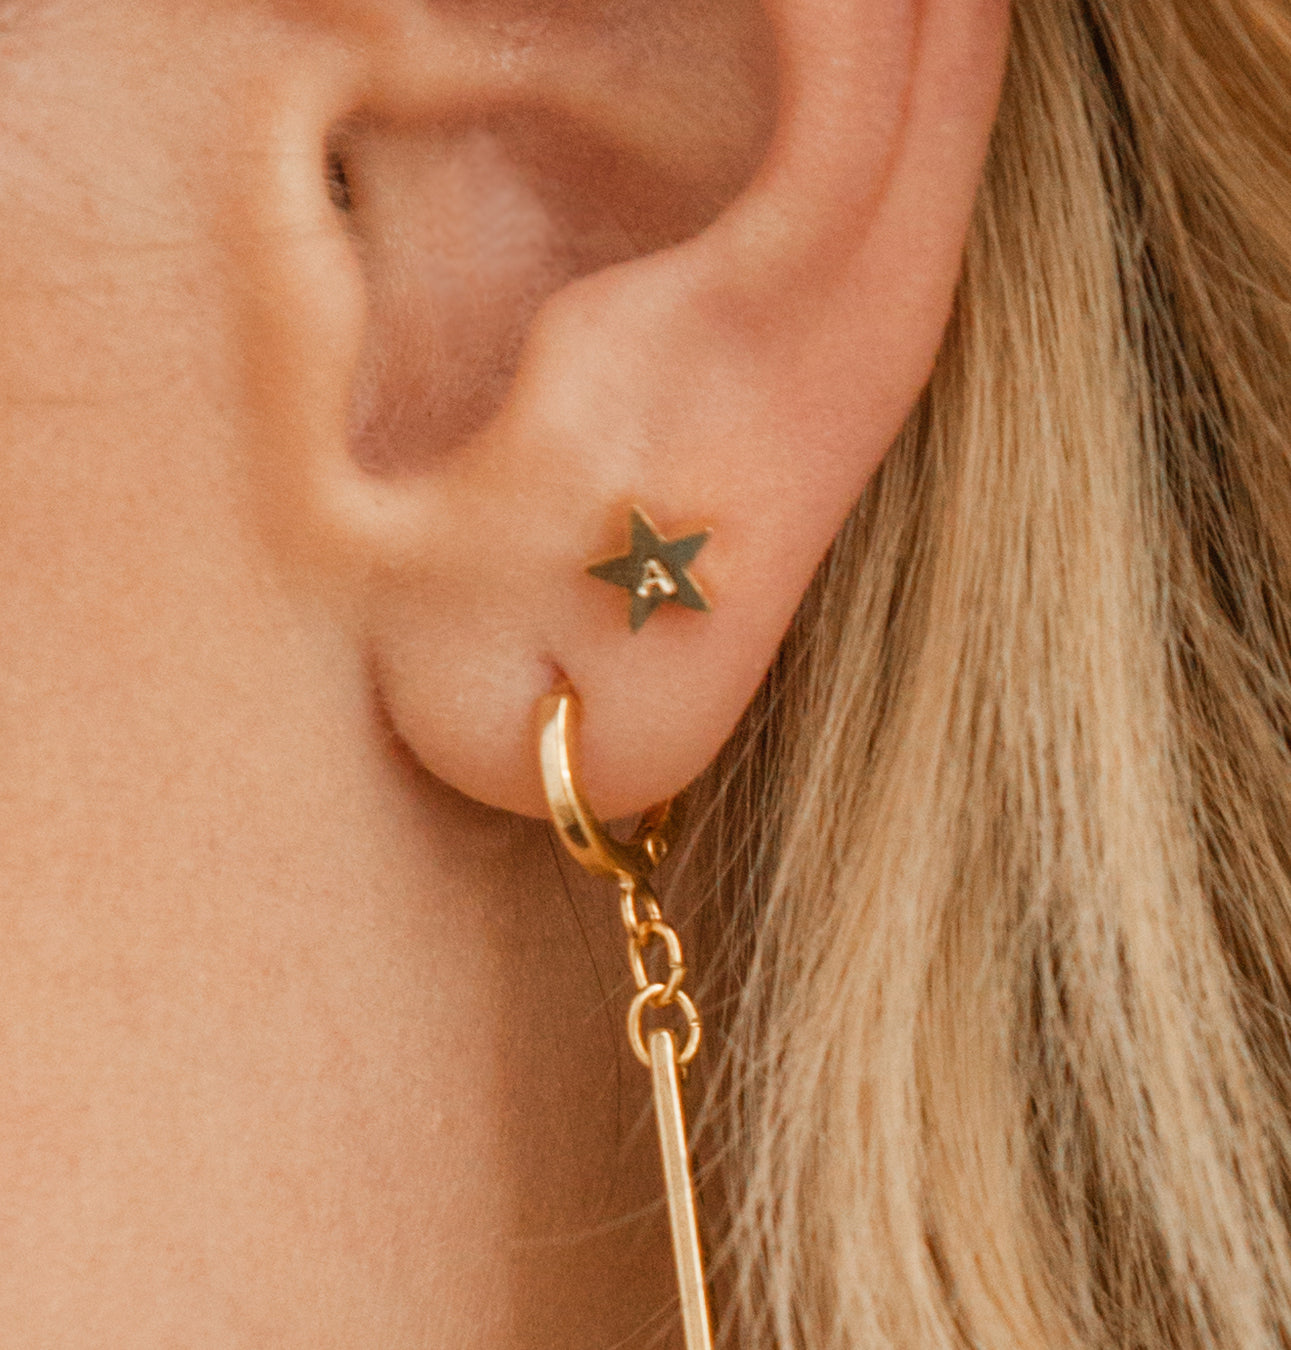 Star stud earrings - Personalized initial on tiny star